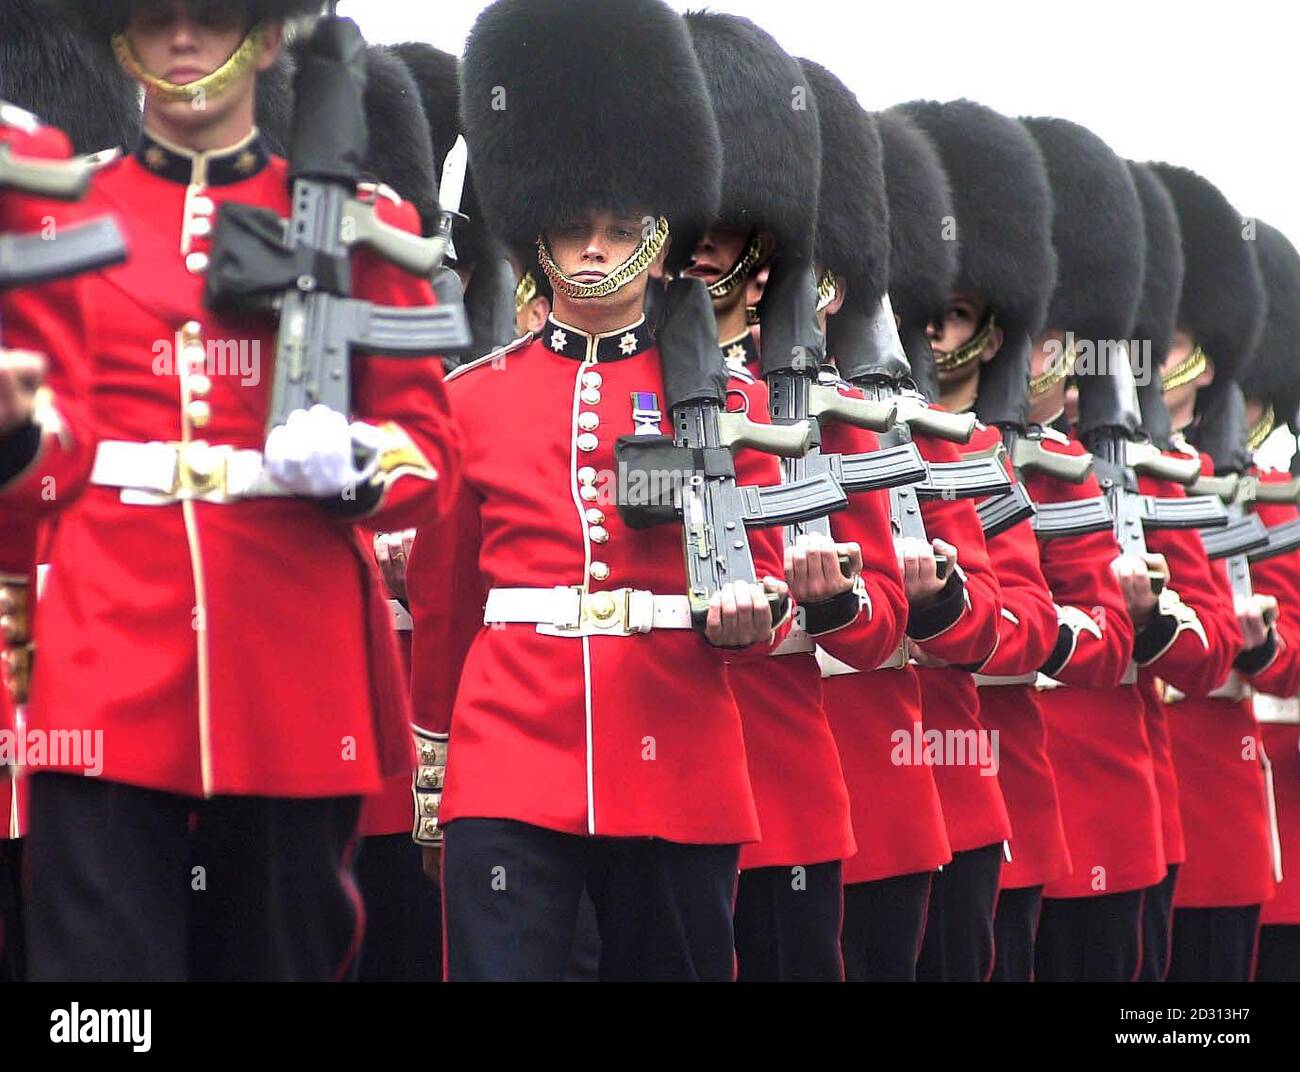 Berwick Upon-Tweed Borough Council announced the conferment of freedom of the borough on the Coldstream Guards. The Guards celebrated 350 years since the founding of the regiment and association with the borough.   *  They marched in Bearskins with fixed bayonets through the streets of Berwick.  Stock Photo